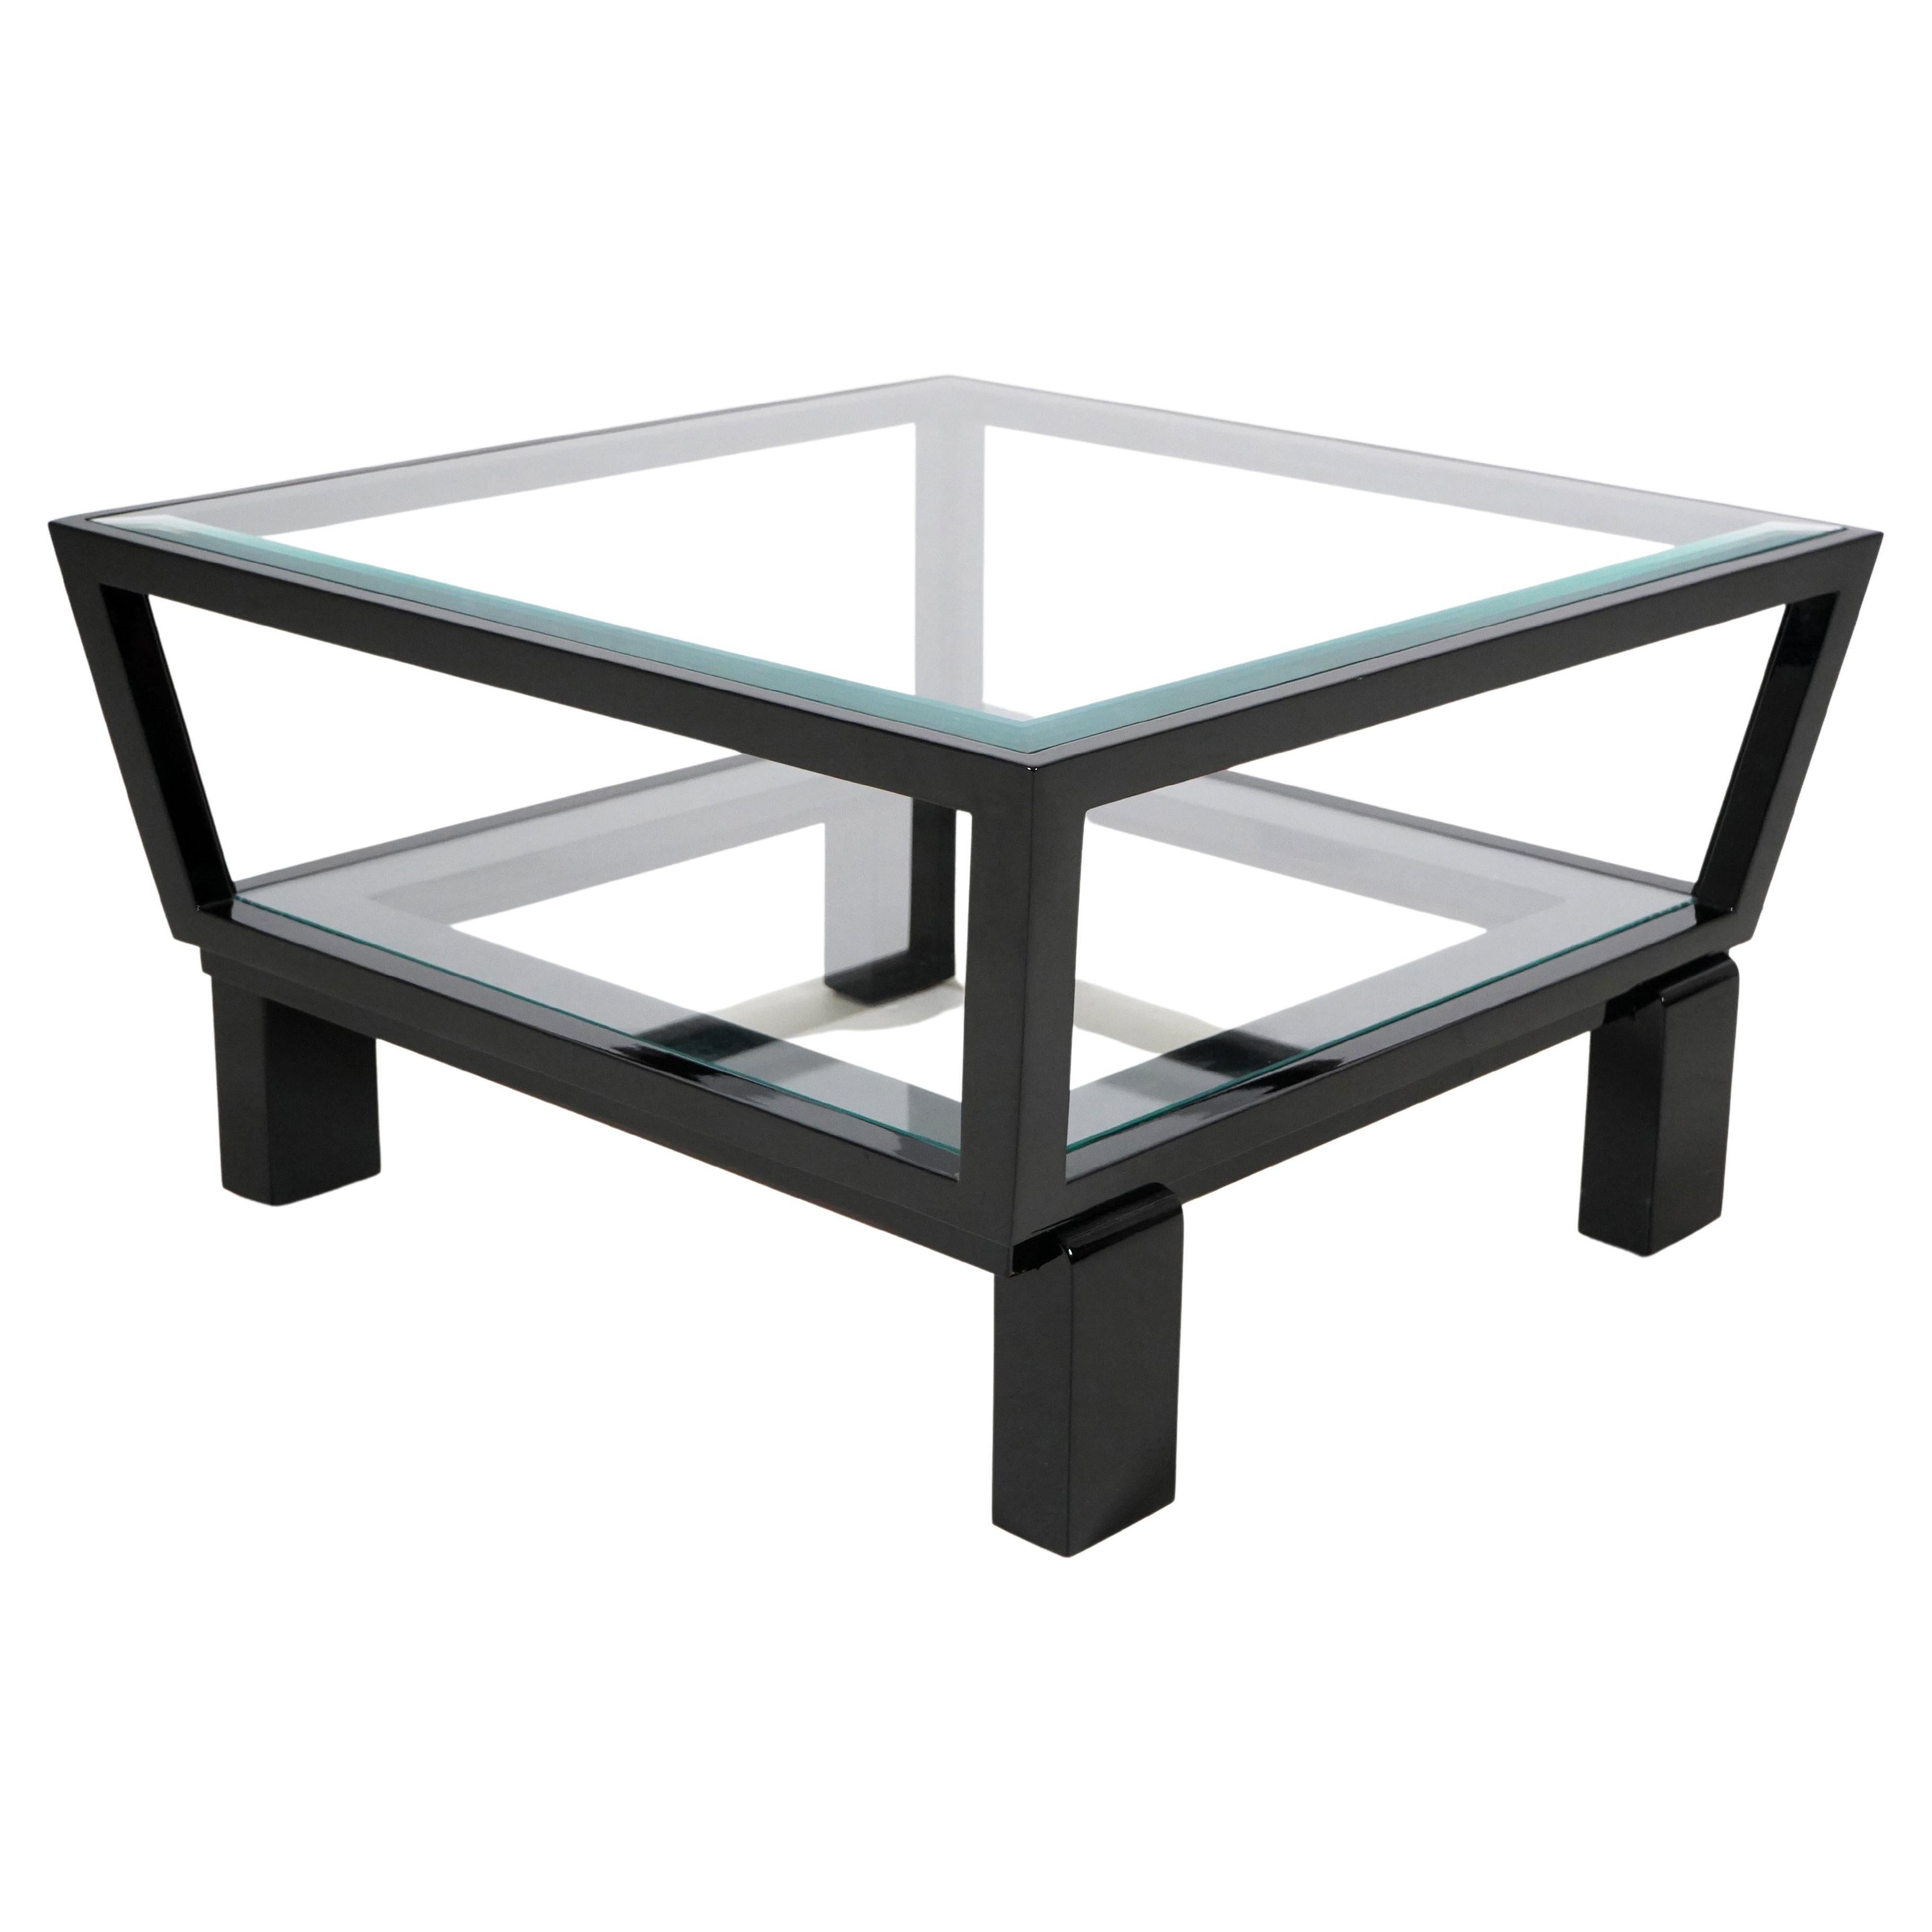 Square Coffee Table with Glass Top Black Wood Frame